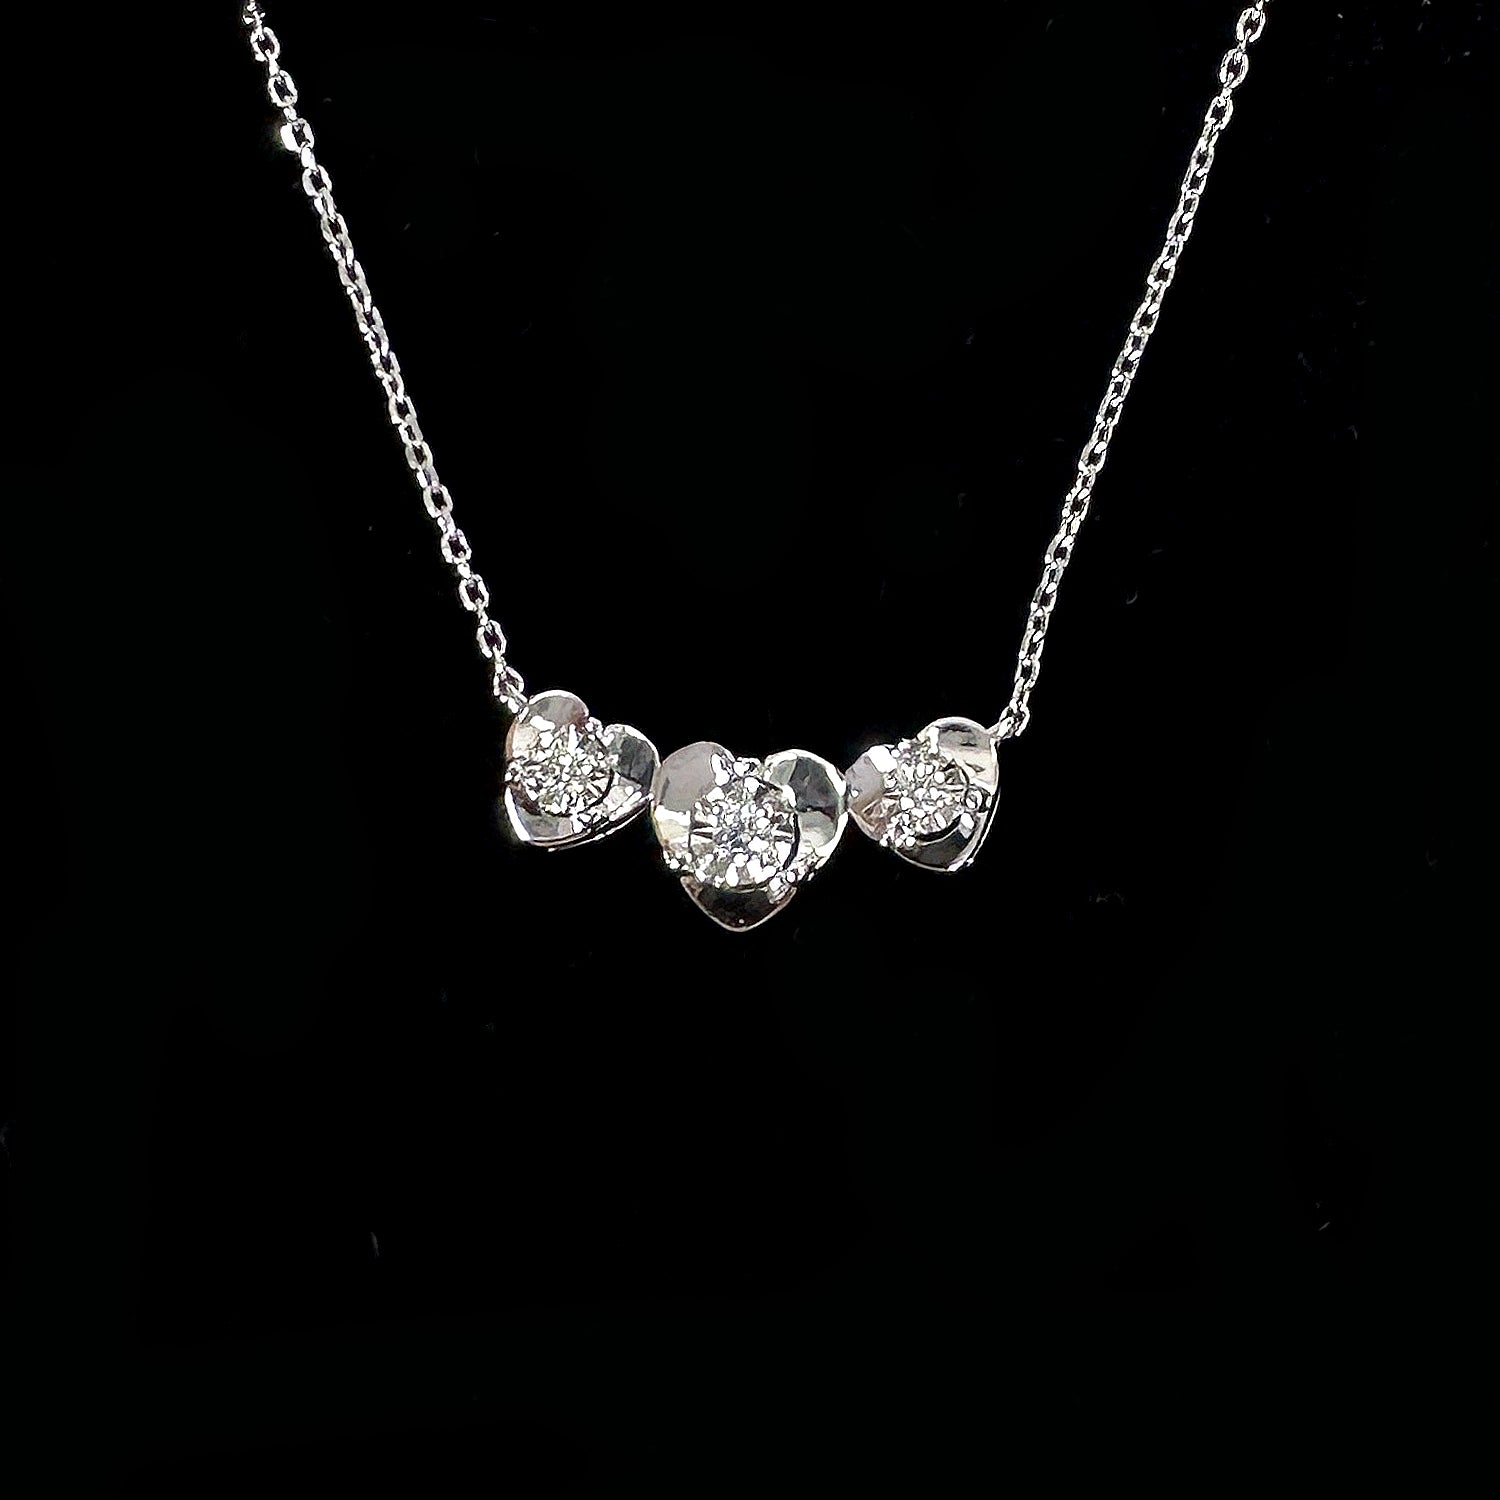 36957 - 18K diamond with 3 heart shaped pendant with chain link included